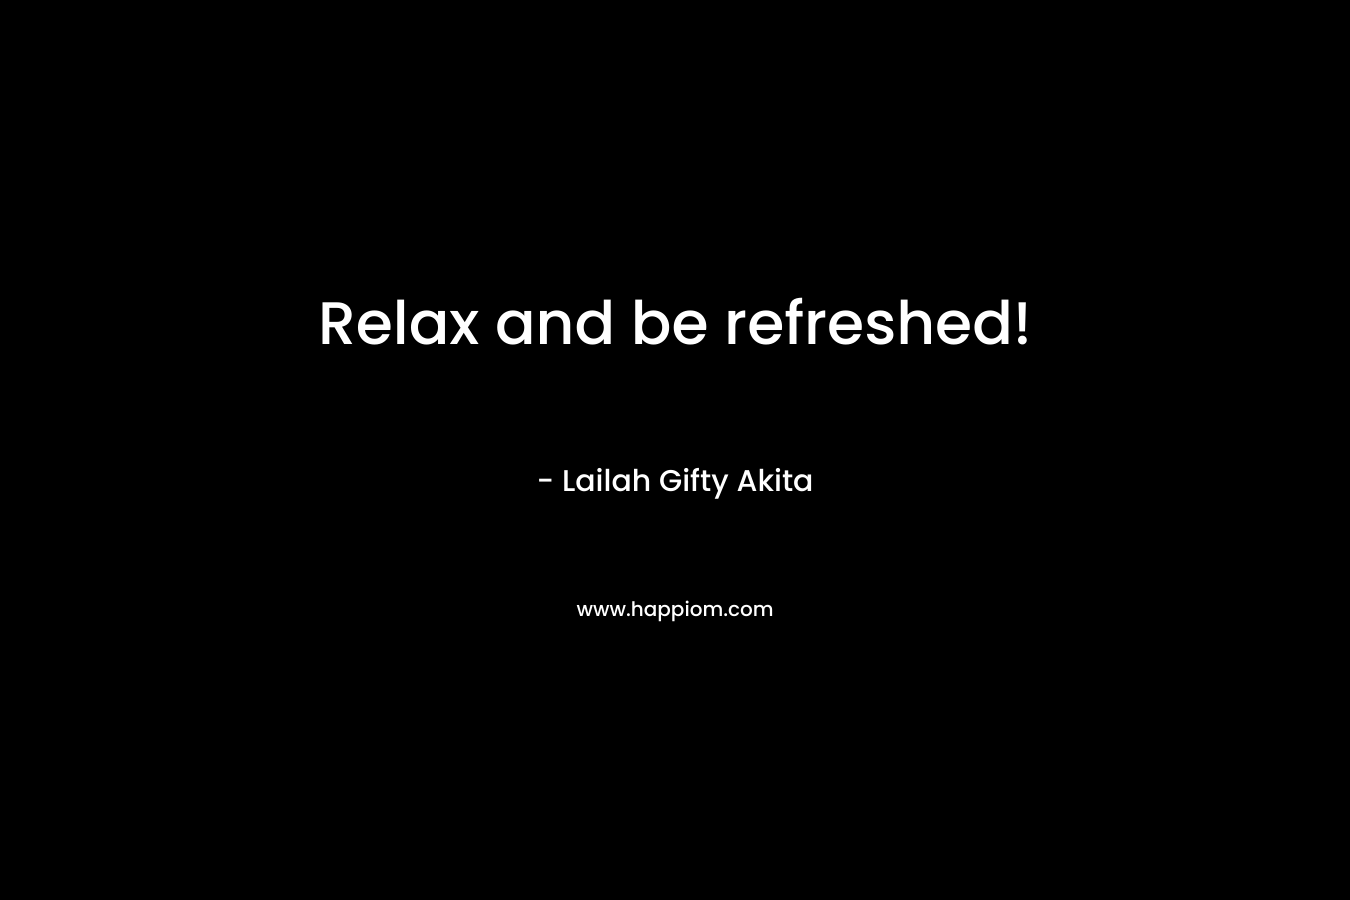 Relax and be refreshed!